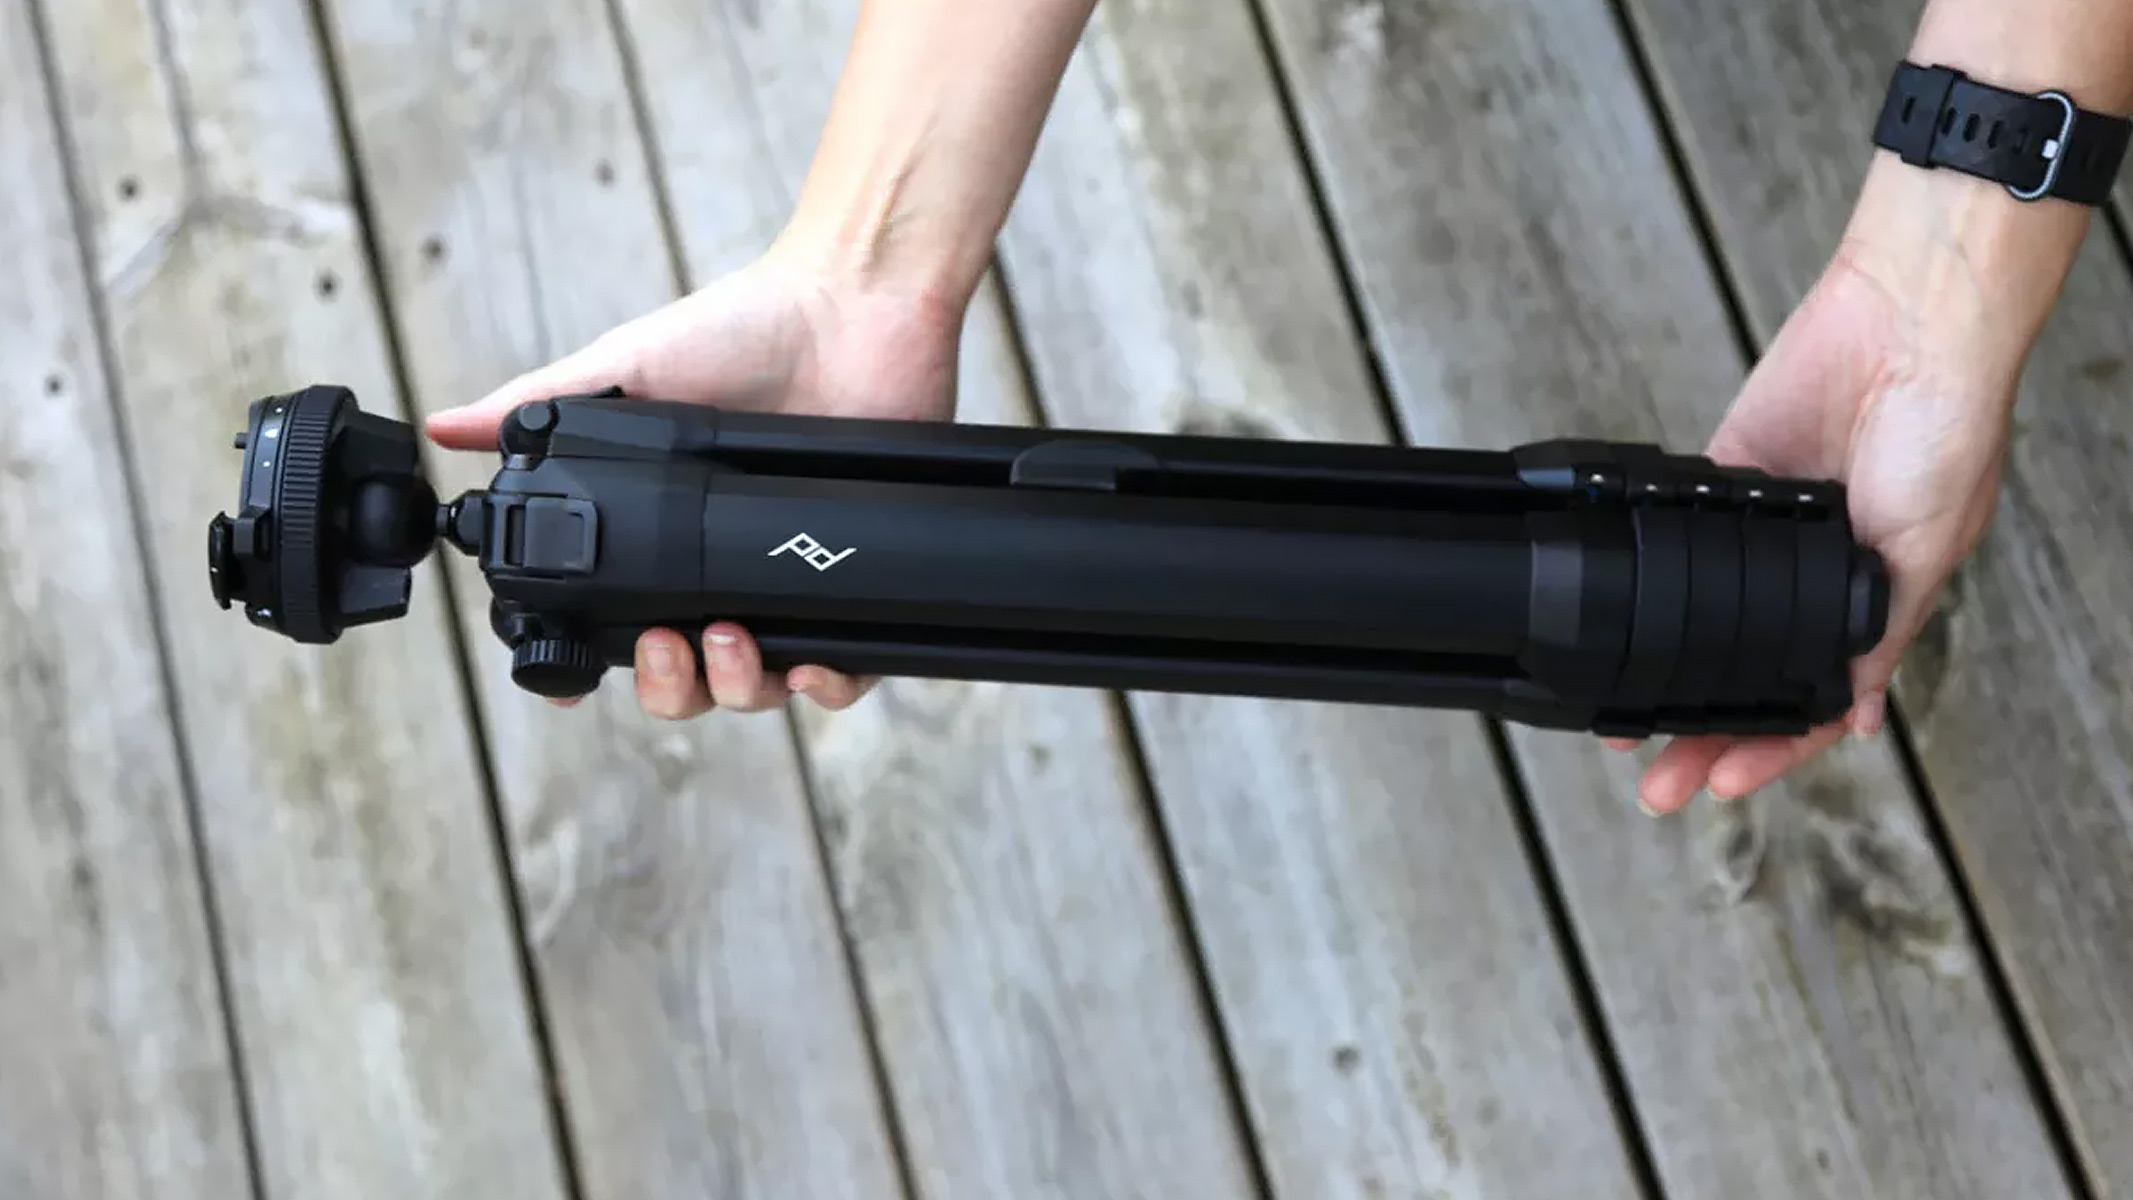 Review image of the Peak Design travel tripod in someone's hand.